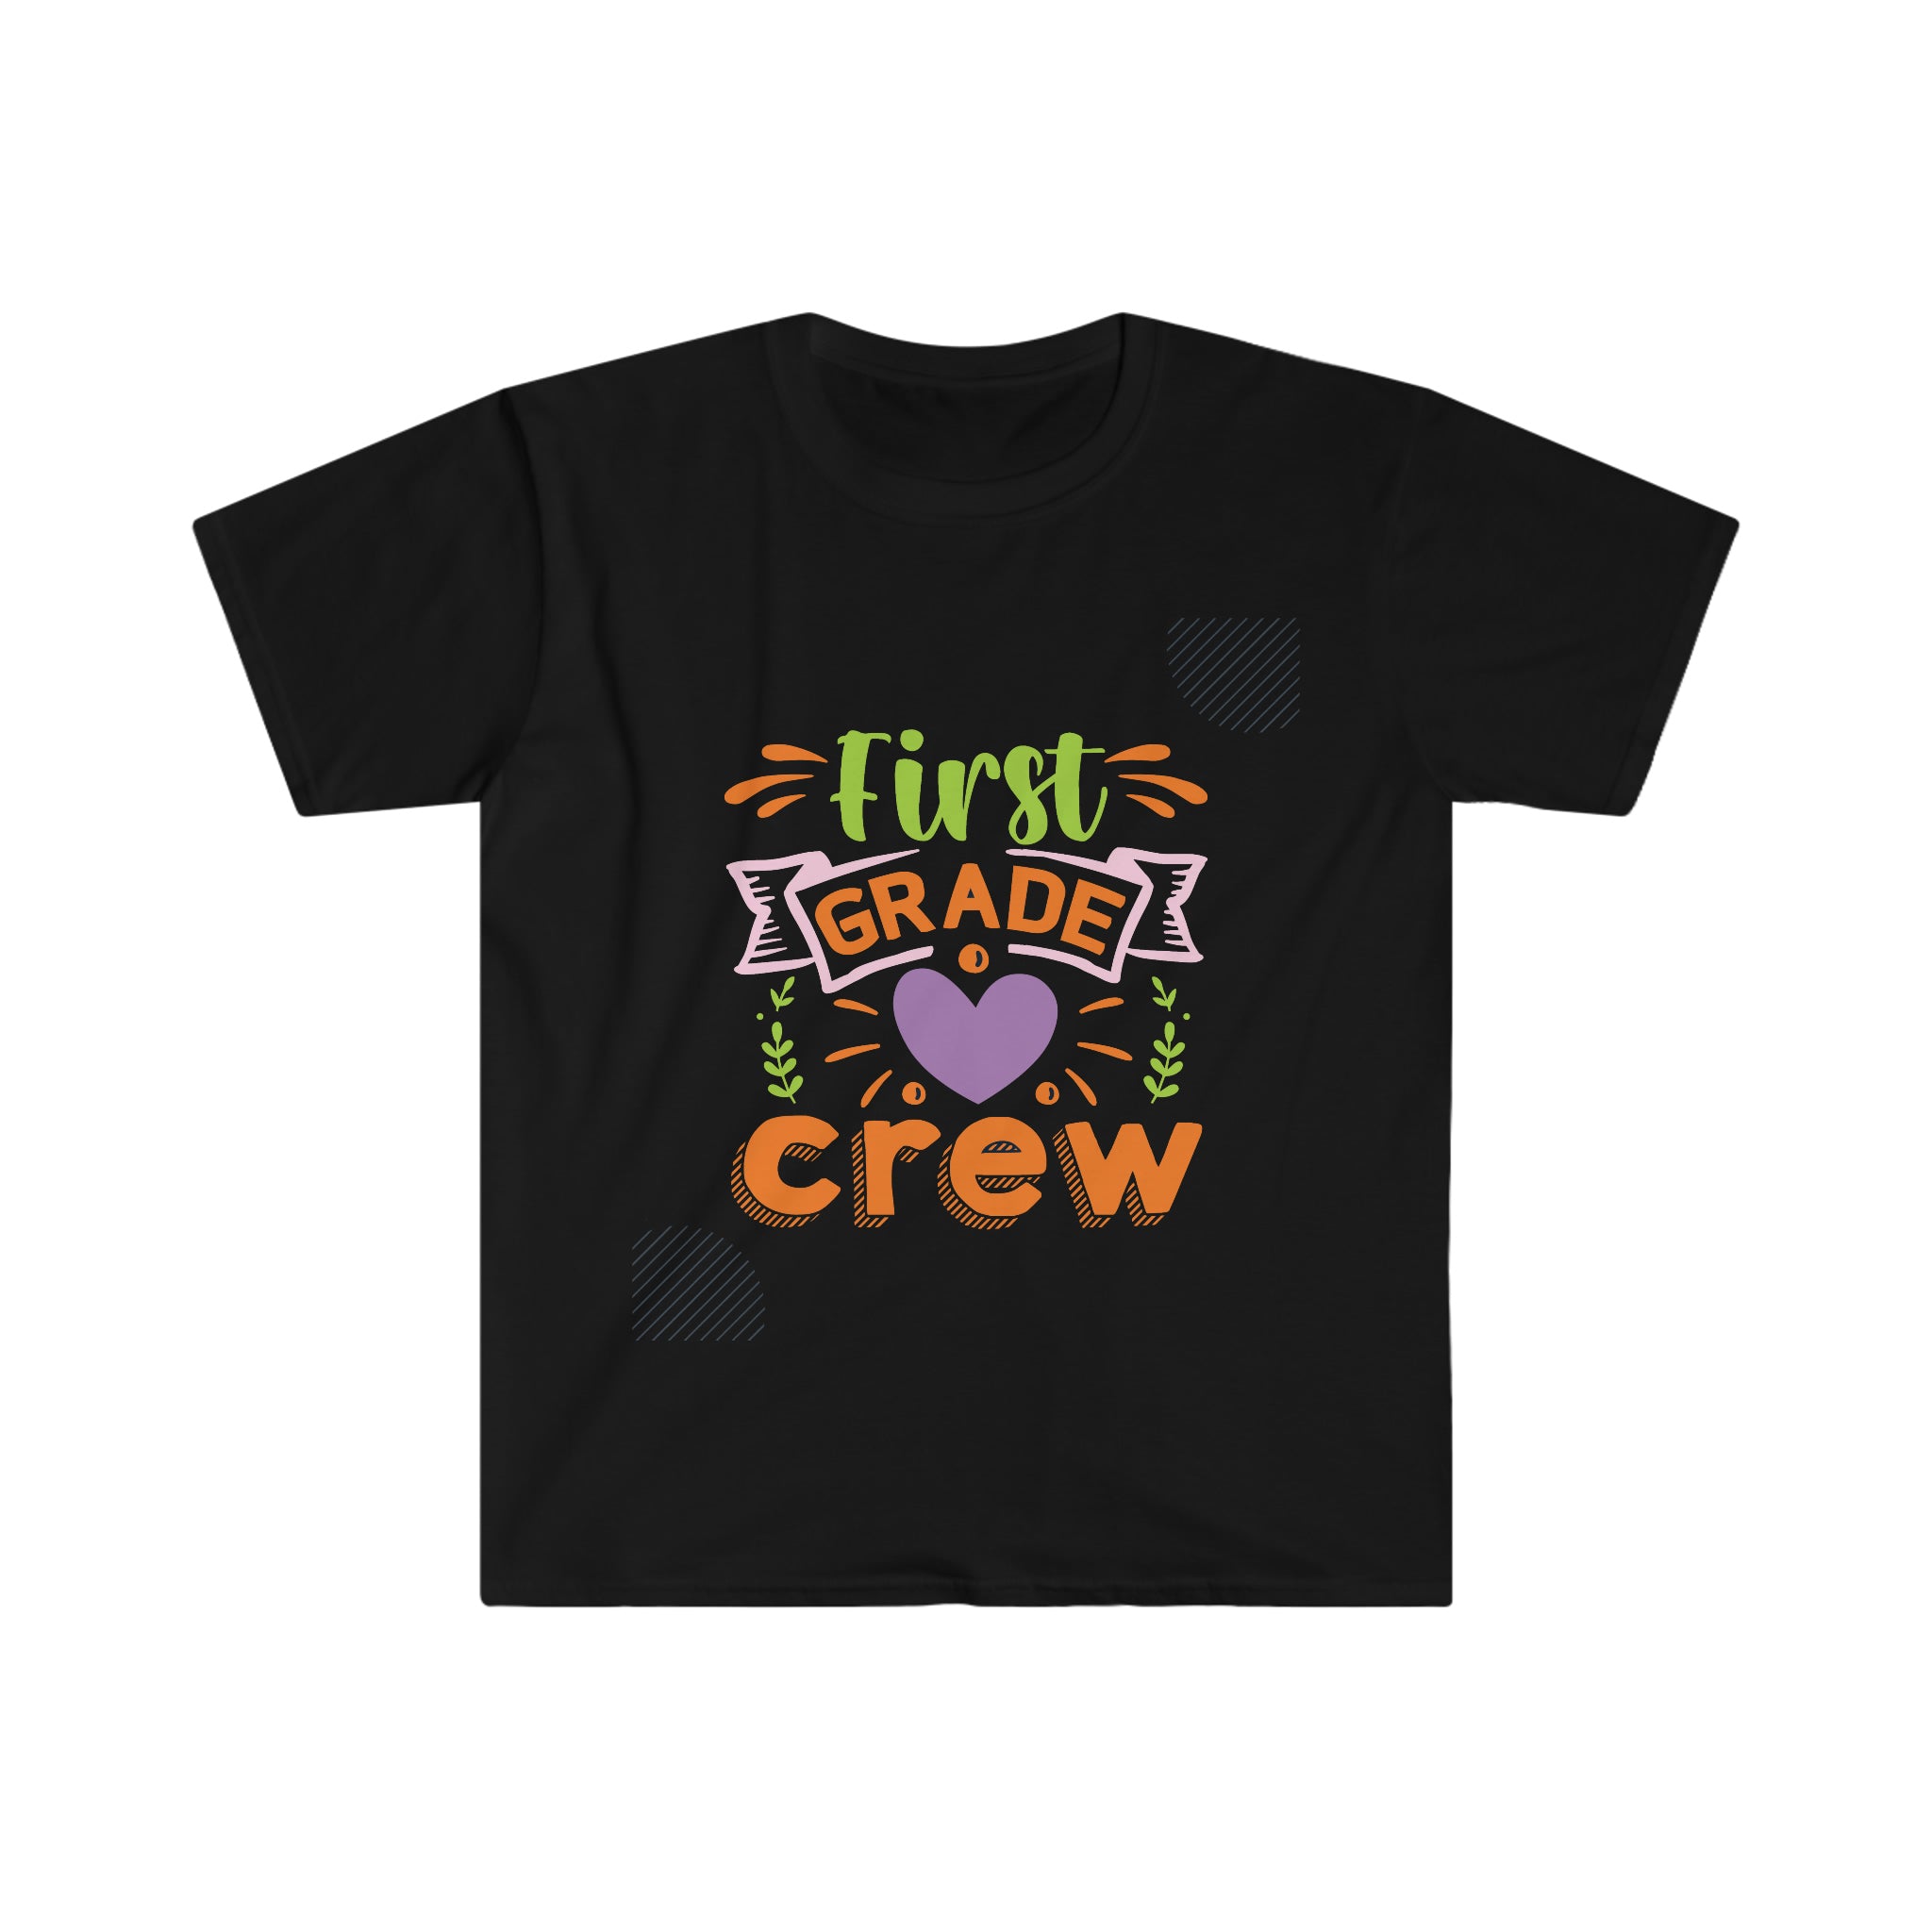 This First Grade Crew T-Shirt is a perfect gift for first grade teachers. The shirt proudly displays the words "first grade crew".